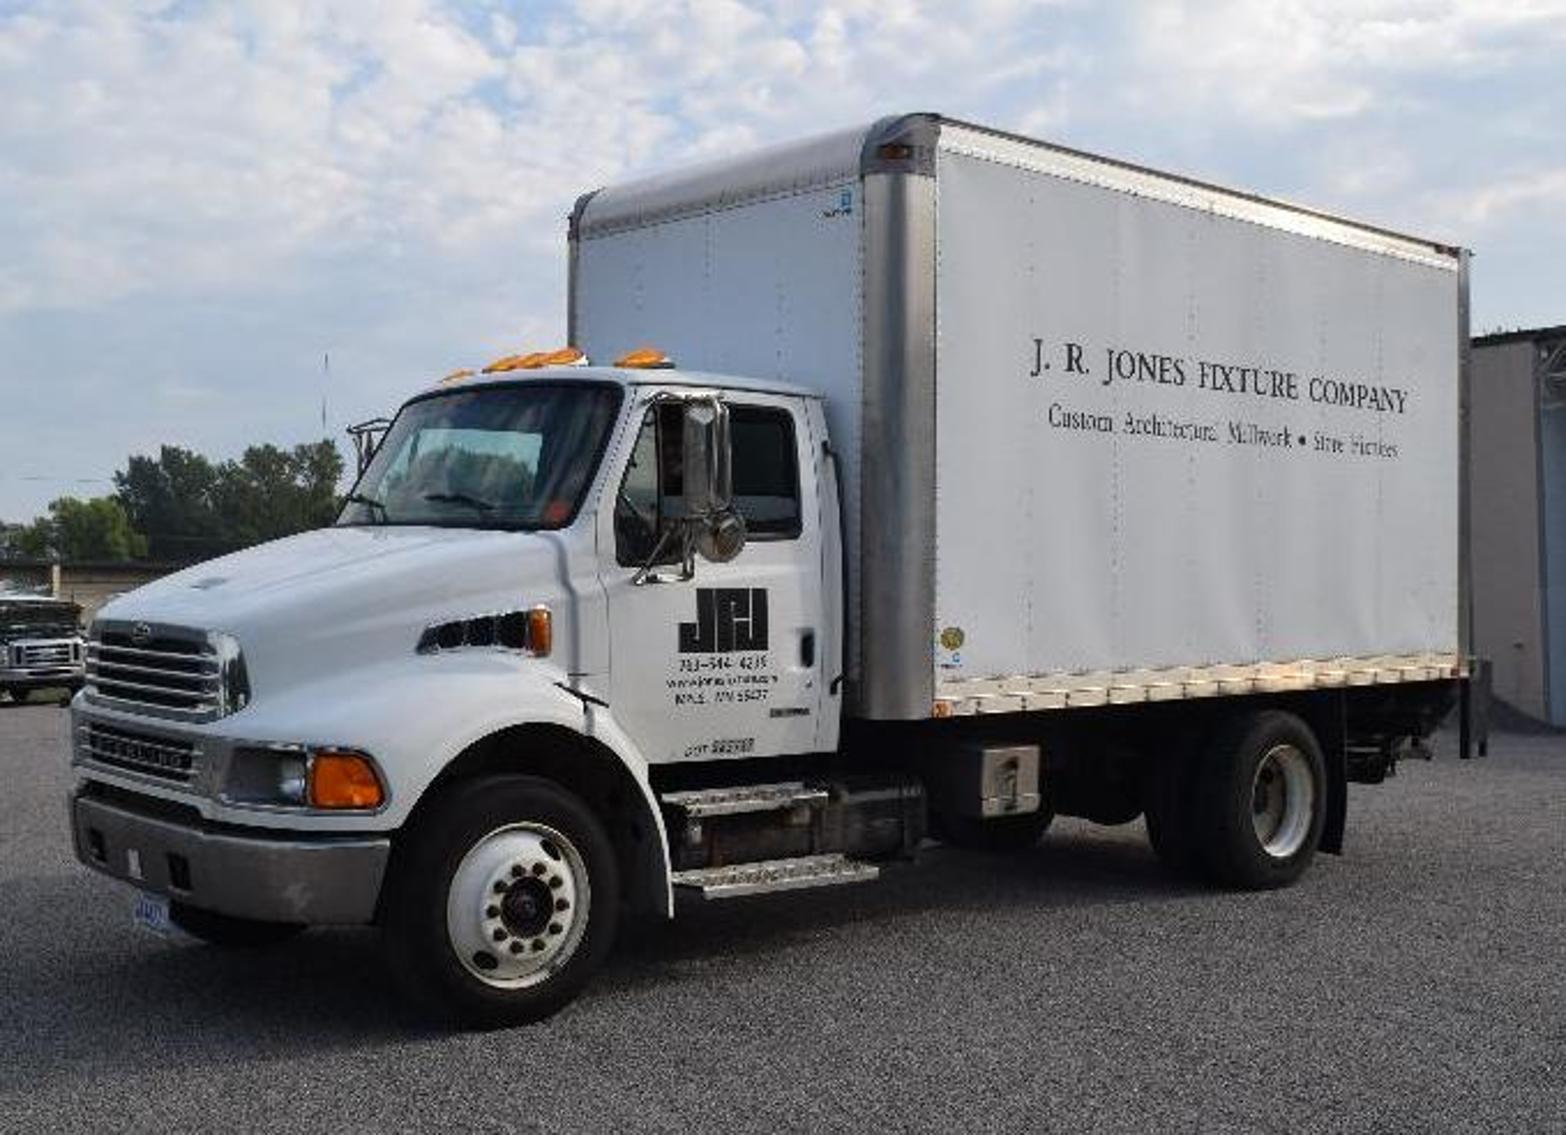 JR Jones Fixture Co. Liquidation, Phase 2 - 2000 Sterling Dock Truck, 100 Nutting Carts and Cantilever Racks -  Only 1 Week of Bidding